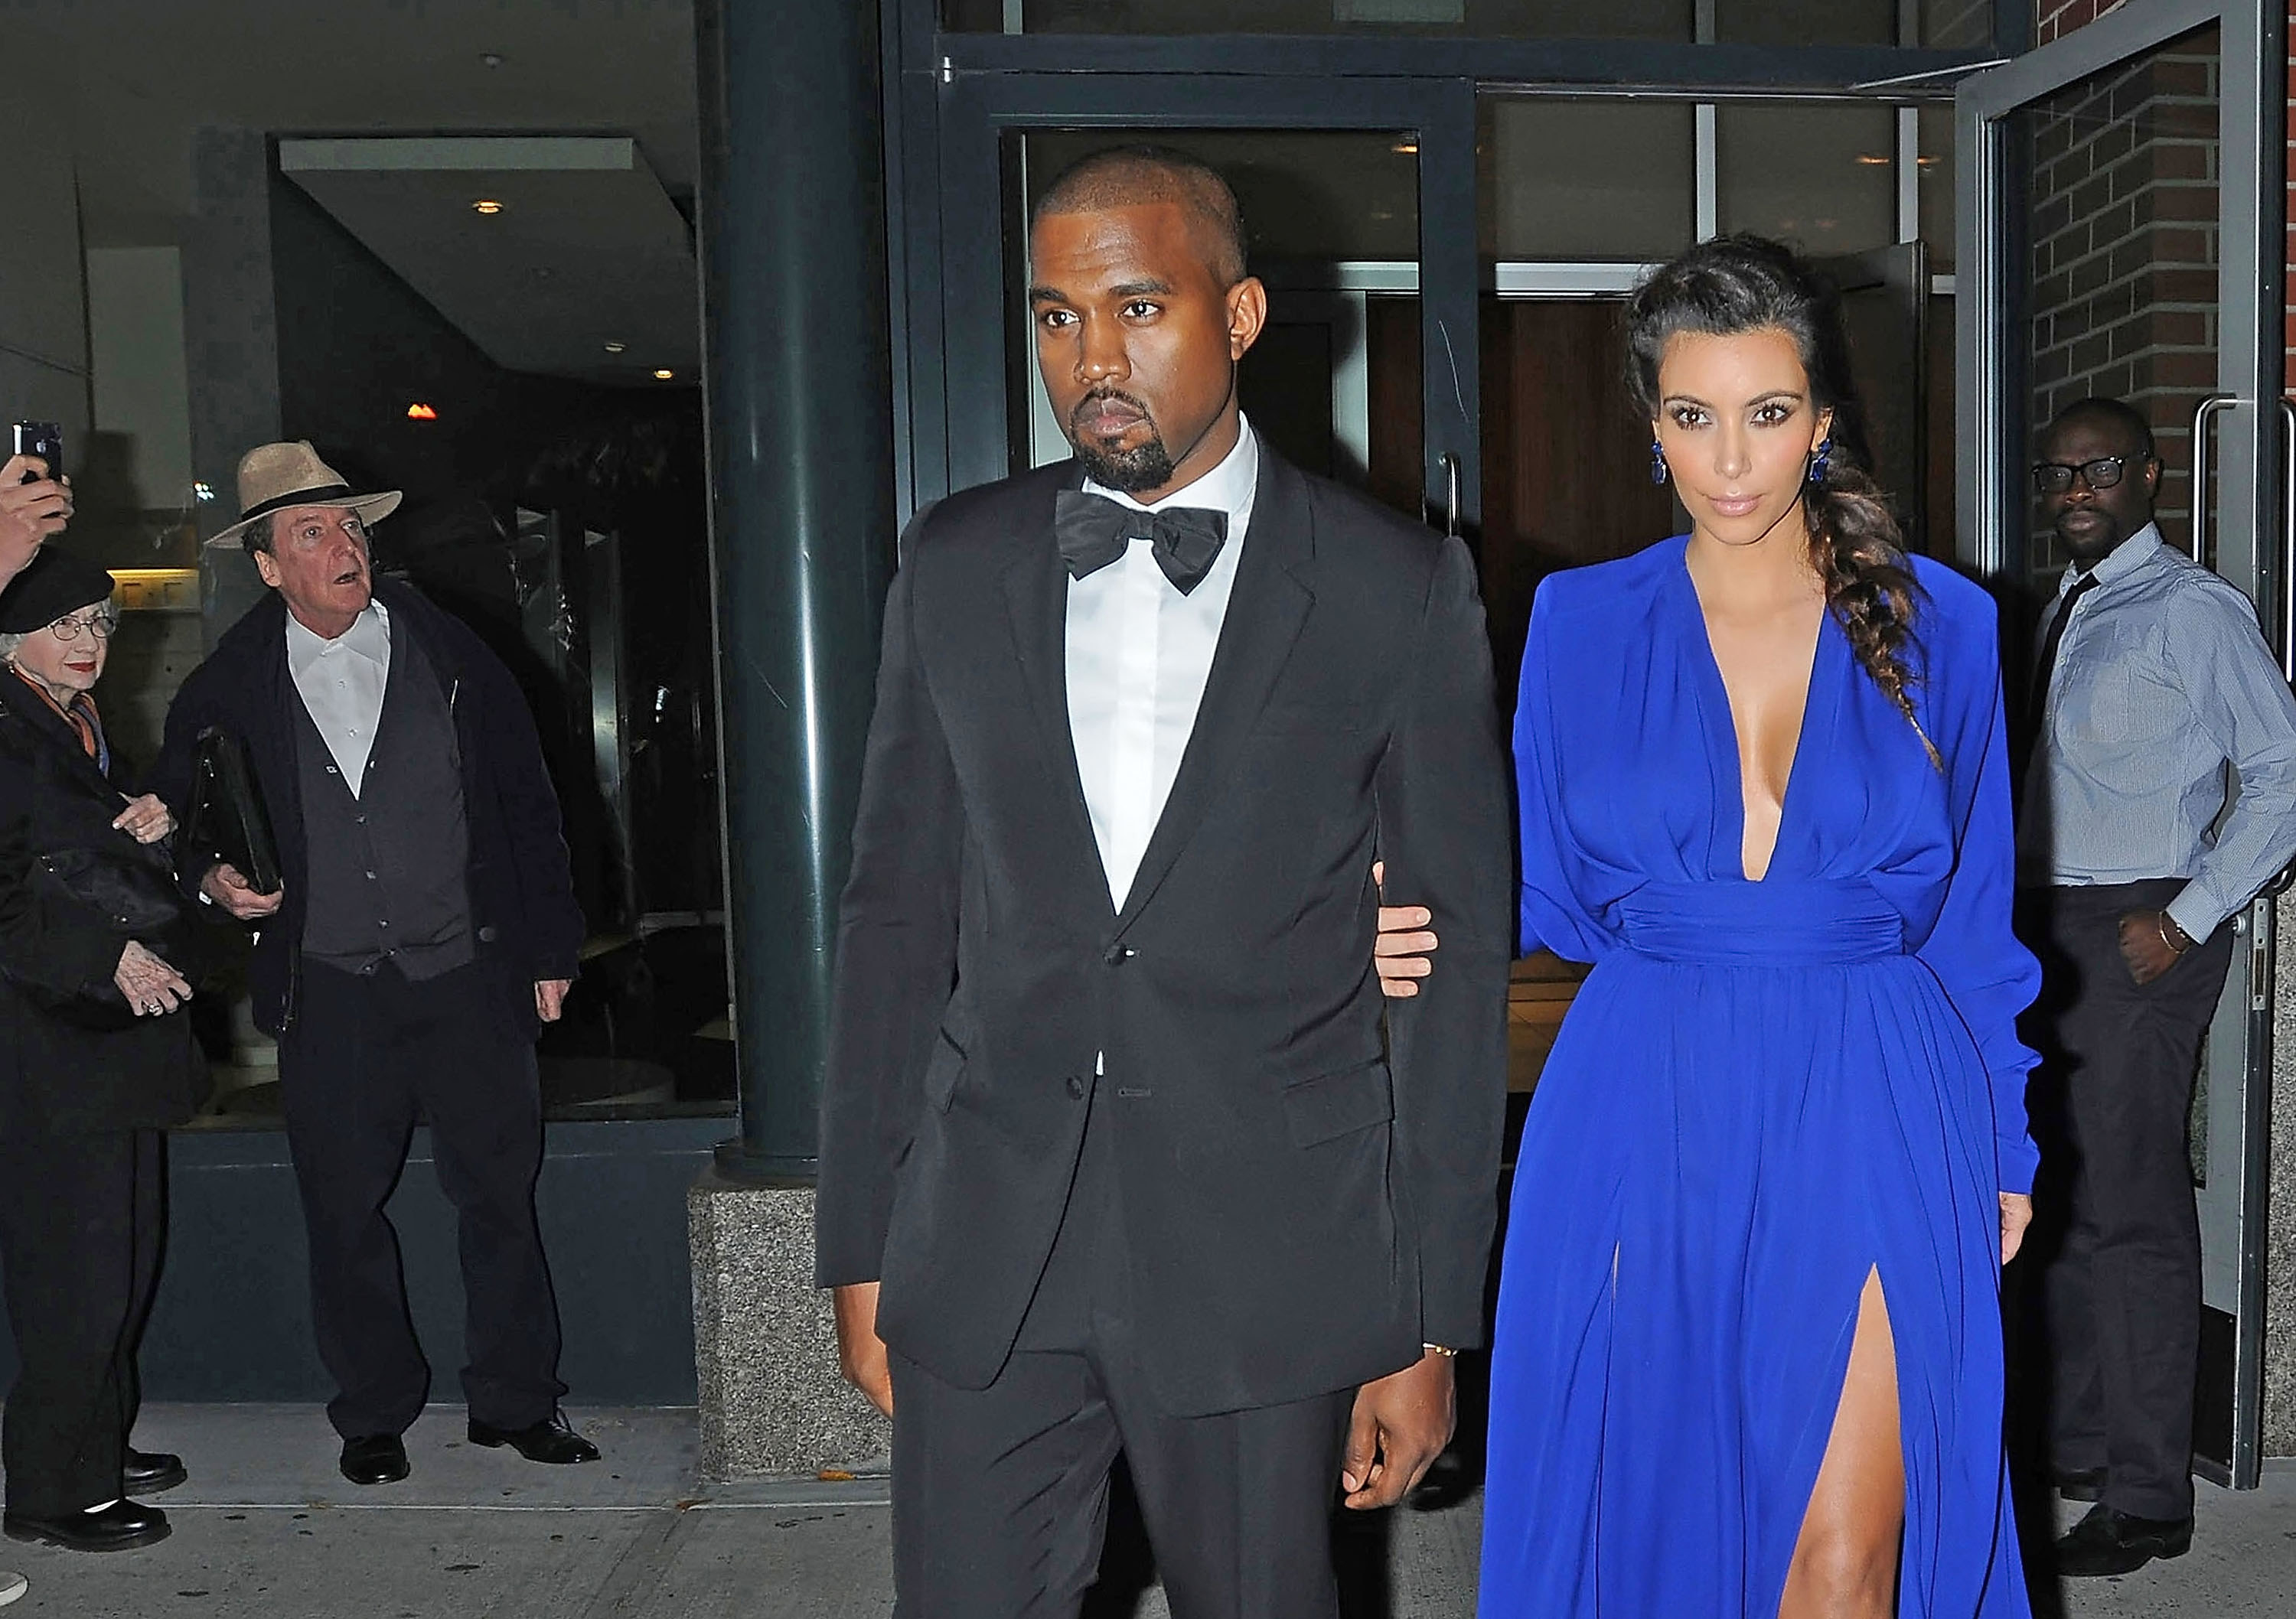 Kanye West and Kim Kardashian are seen on October 22, 2012 in New York City